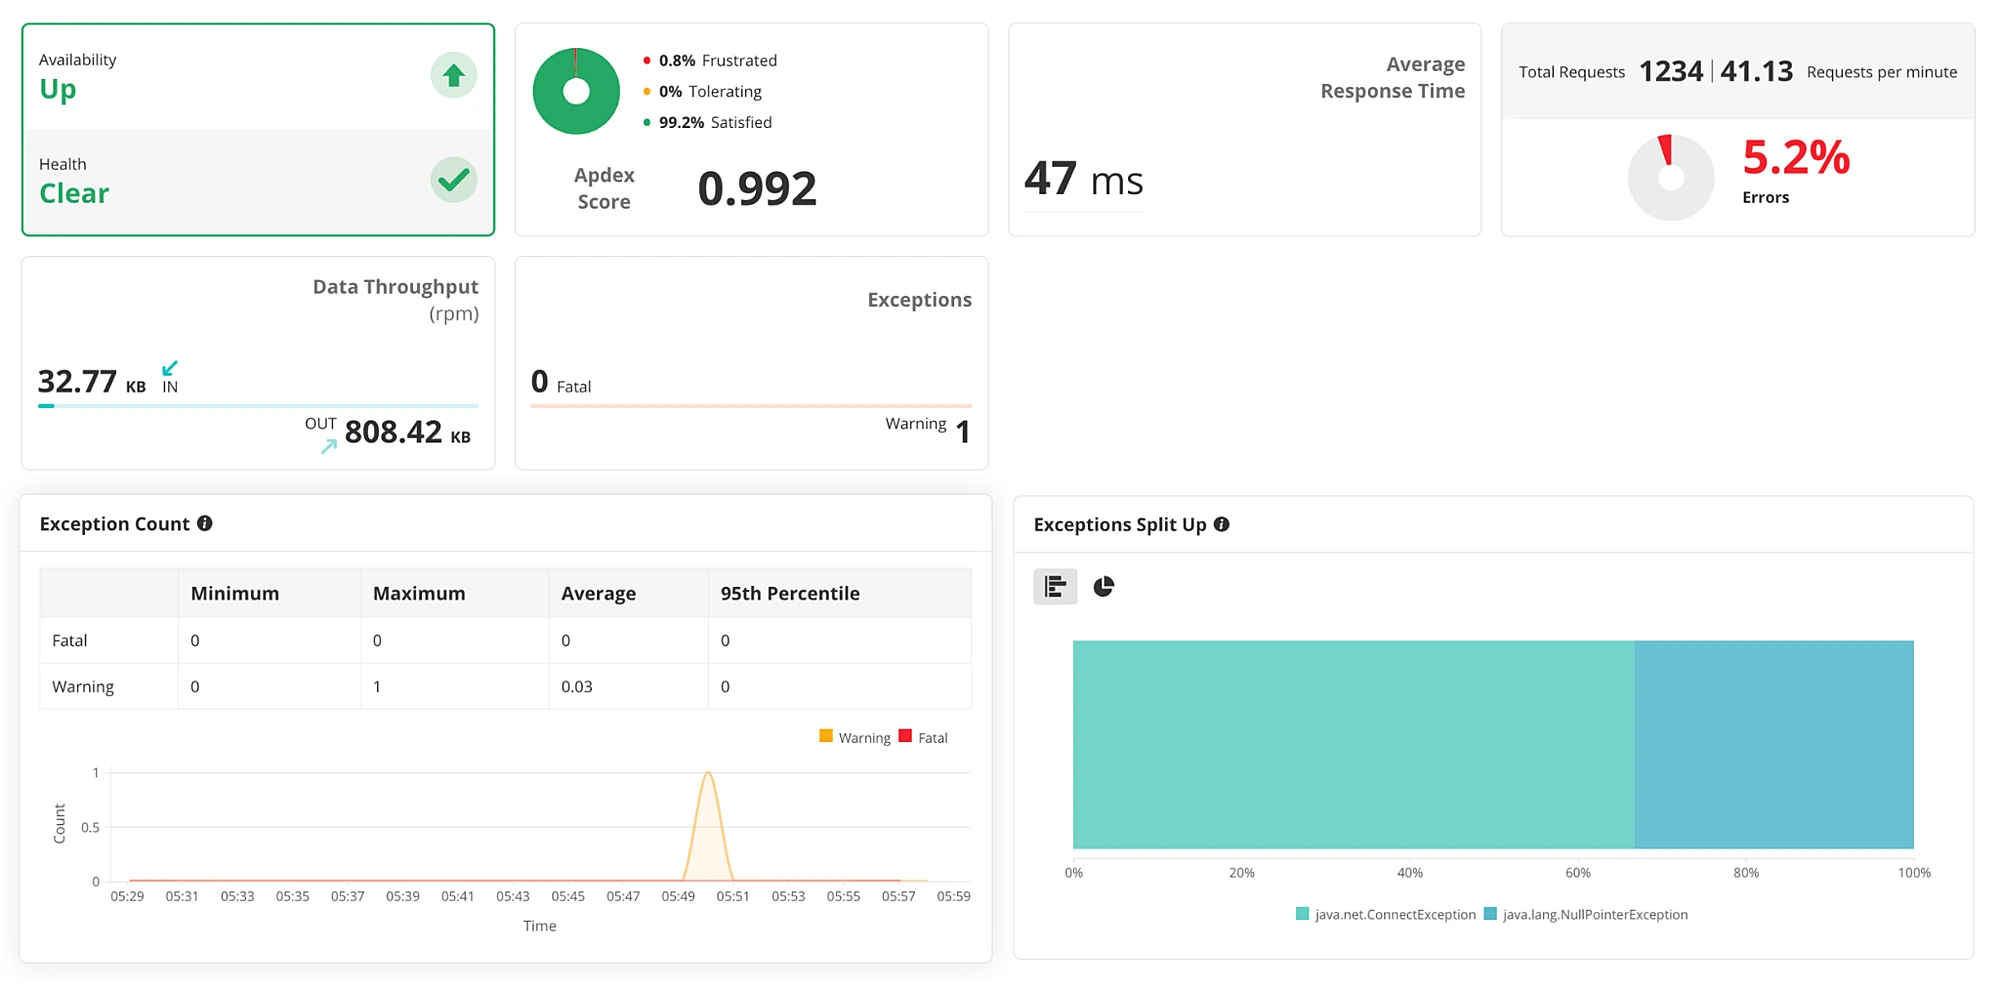 ManageEngine Applications Manager's application performance monitoring dashboard showing availability, health, and apdex scores